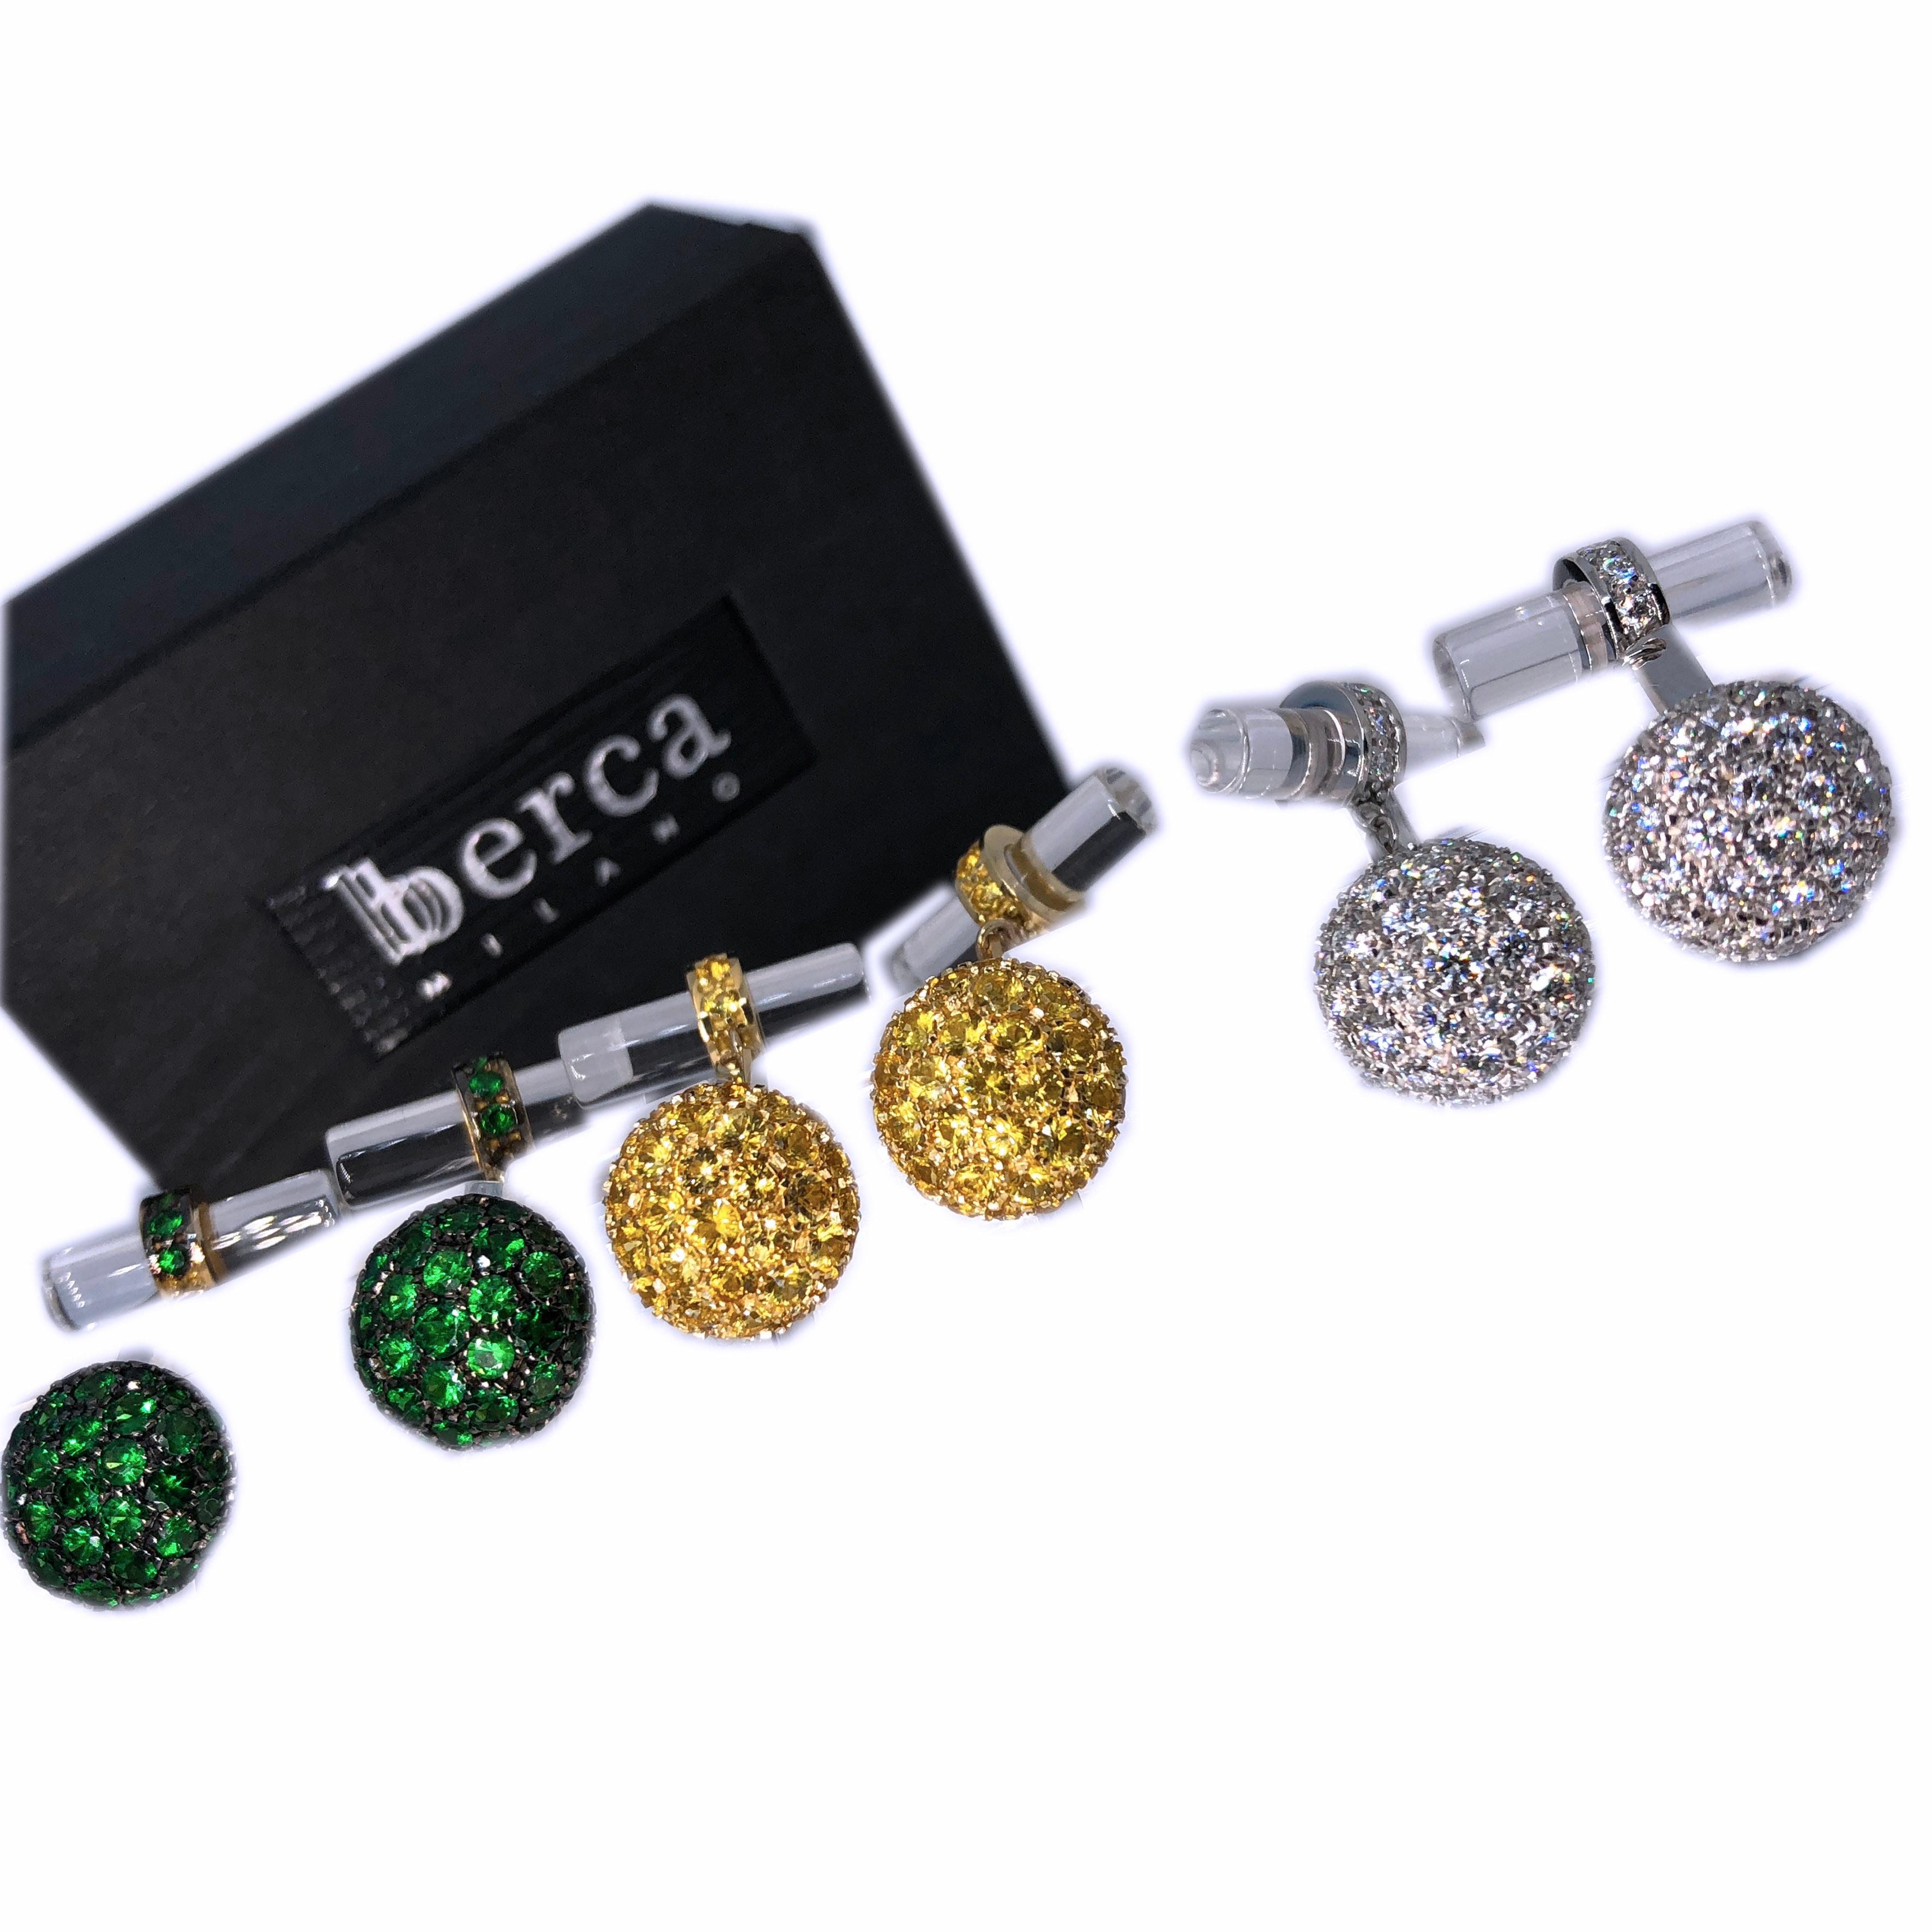 Berca 1.81 Carat White Diamond 18K White Gold Rock Crystal Cufflinks In New Condition For Sale In Valenza, IT